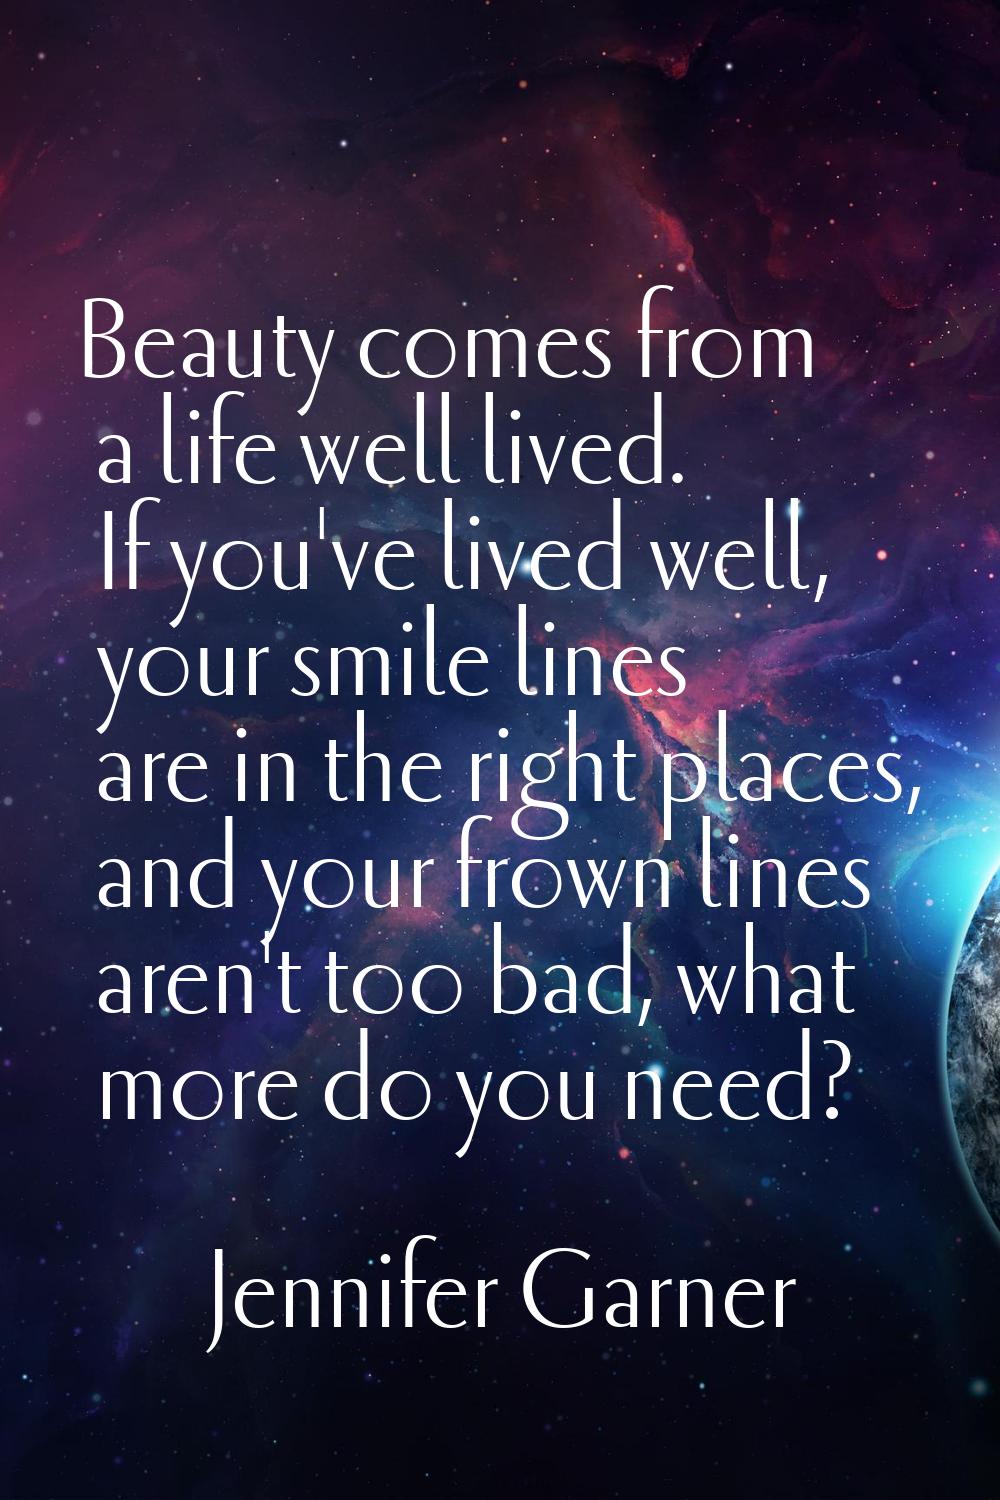 Beauty comes from a life well lived. If you've lived well, your smile lines are in the right places